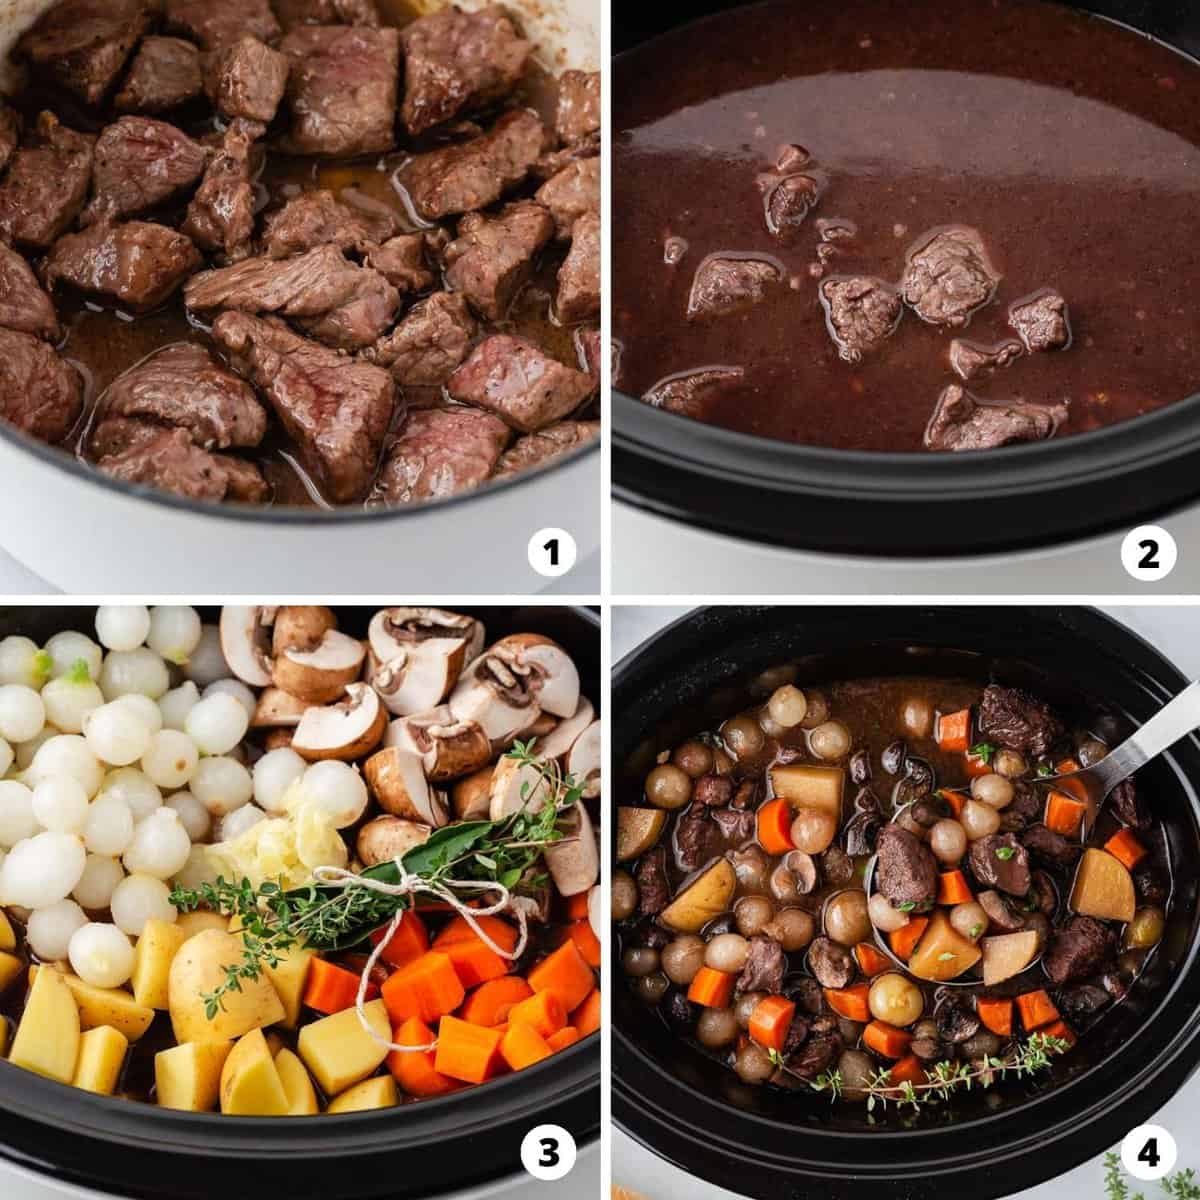 The process of making Beef Bourguignon in a slow cooker.